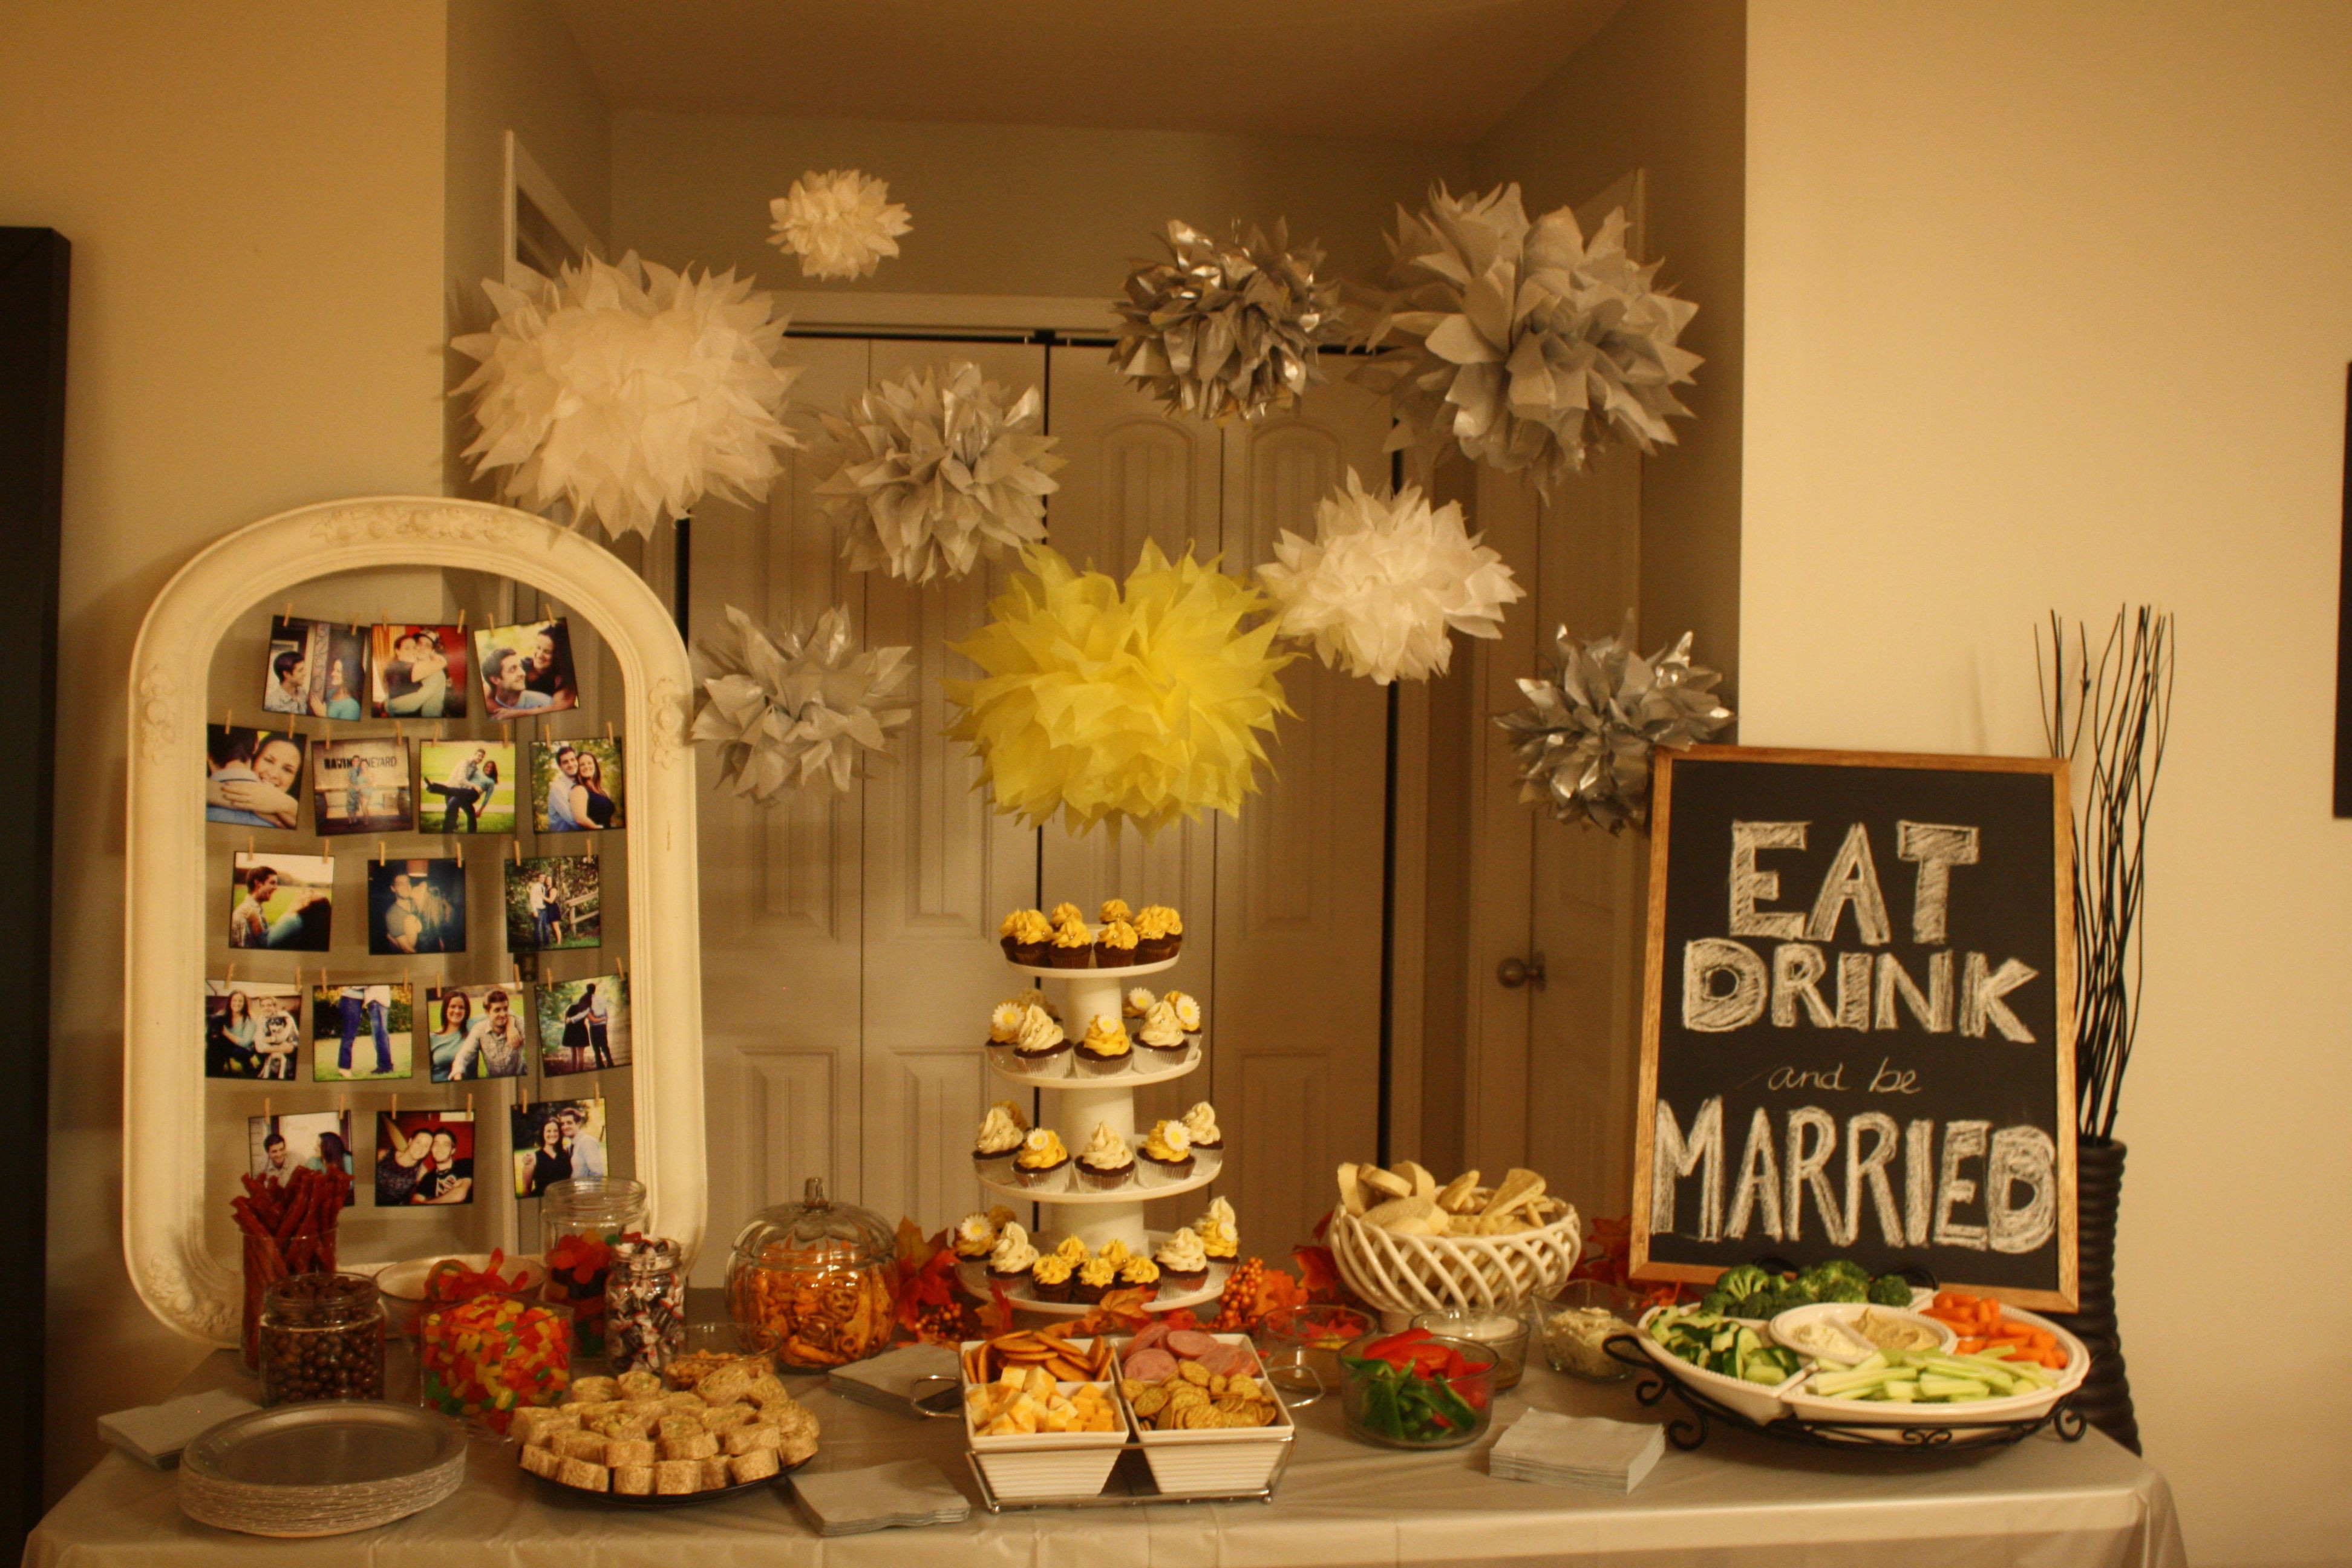 Engagement Party Ideas Pinterest
 Engagement Party Decorations My Pinterest inspired DIY